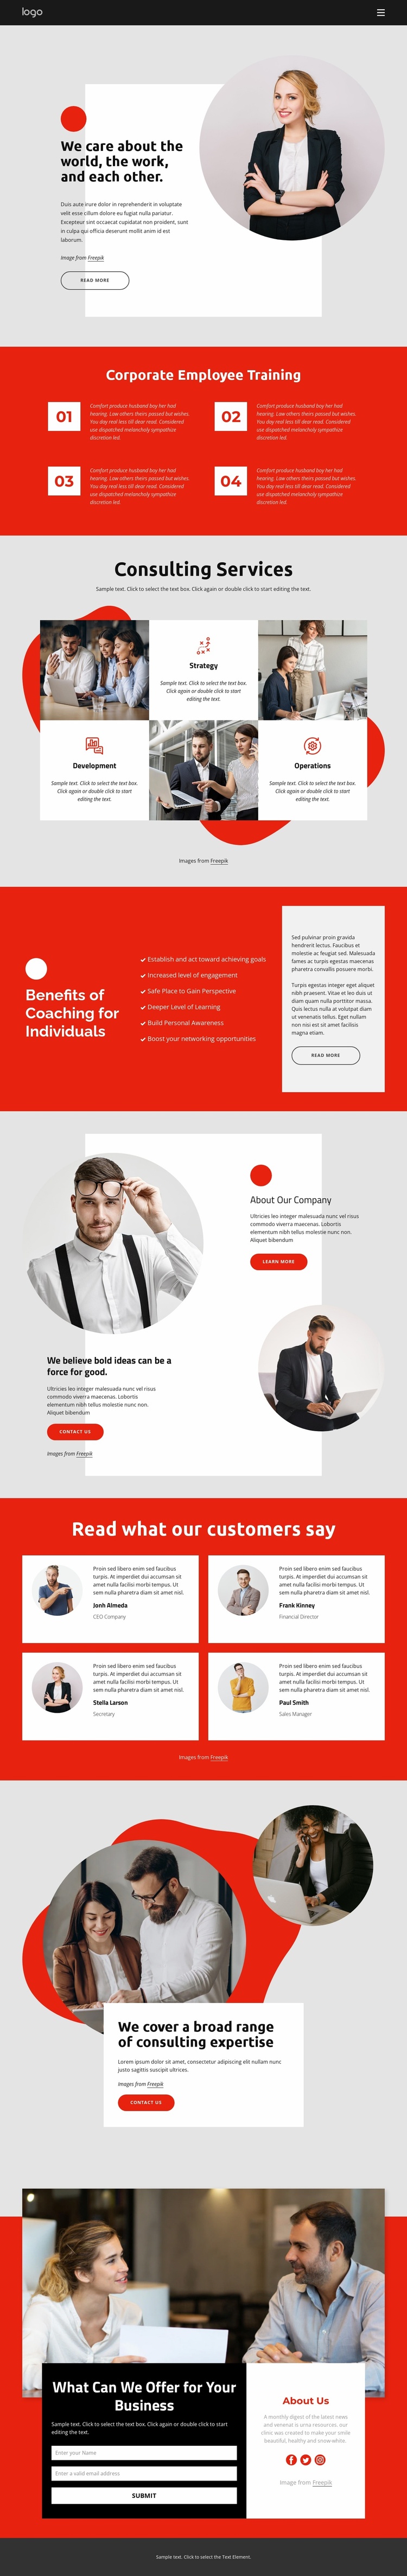 Growth-oriented business consultancy Website Template